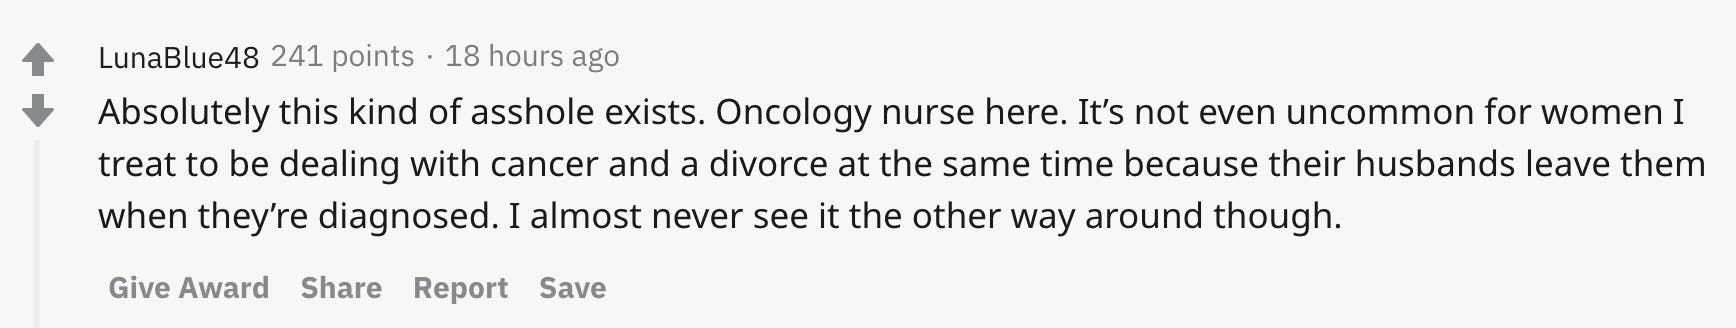 Absolutely this kind of asshole exists. Oncology nurse here. It’s not even uncommon for women I treat to be dealing with cancer and a divorce at the same time because their husbands leave them when they’re diagnosed. I almost never see it the other way around though.